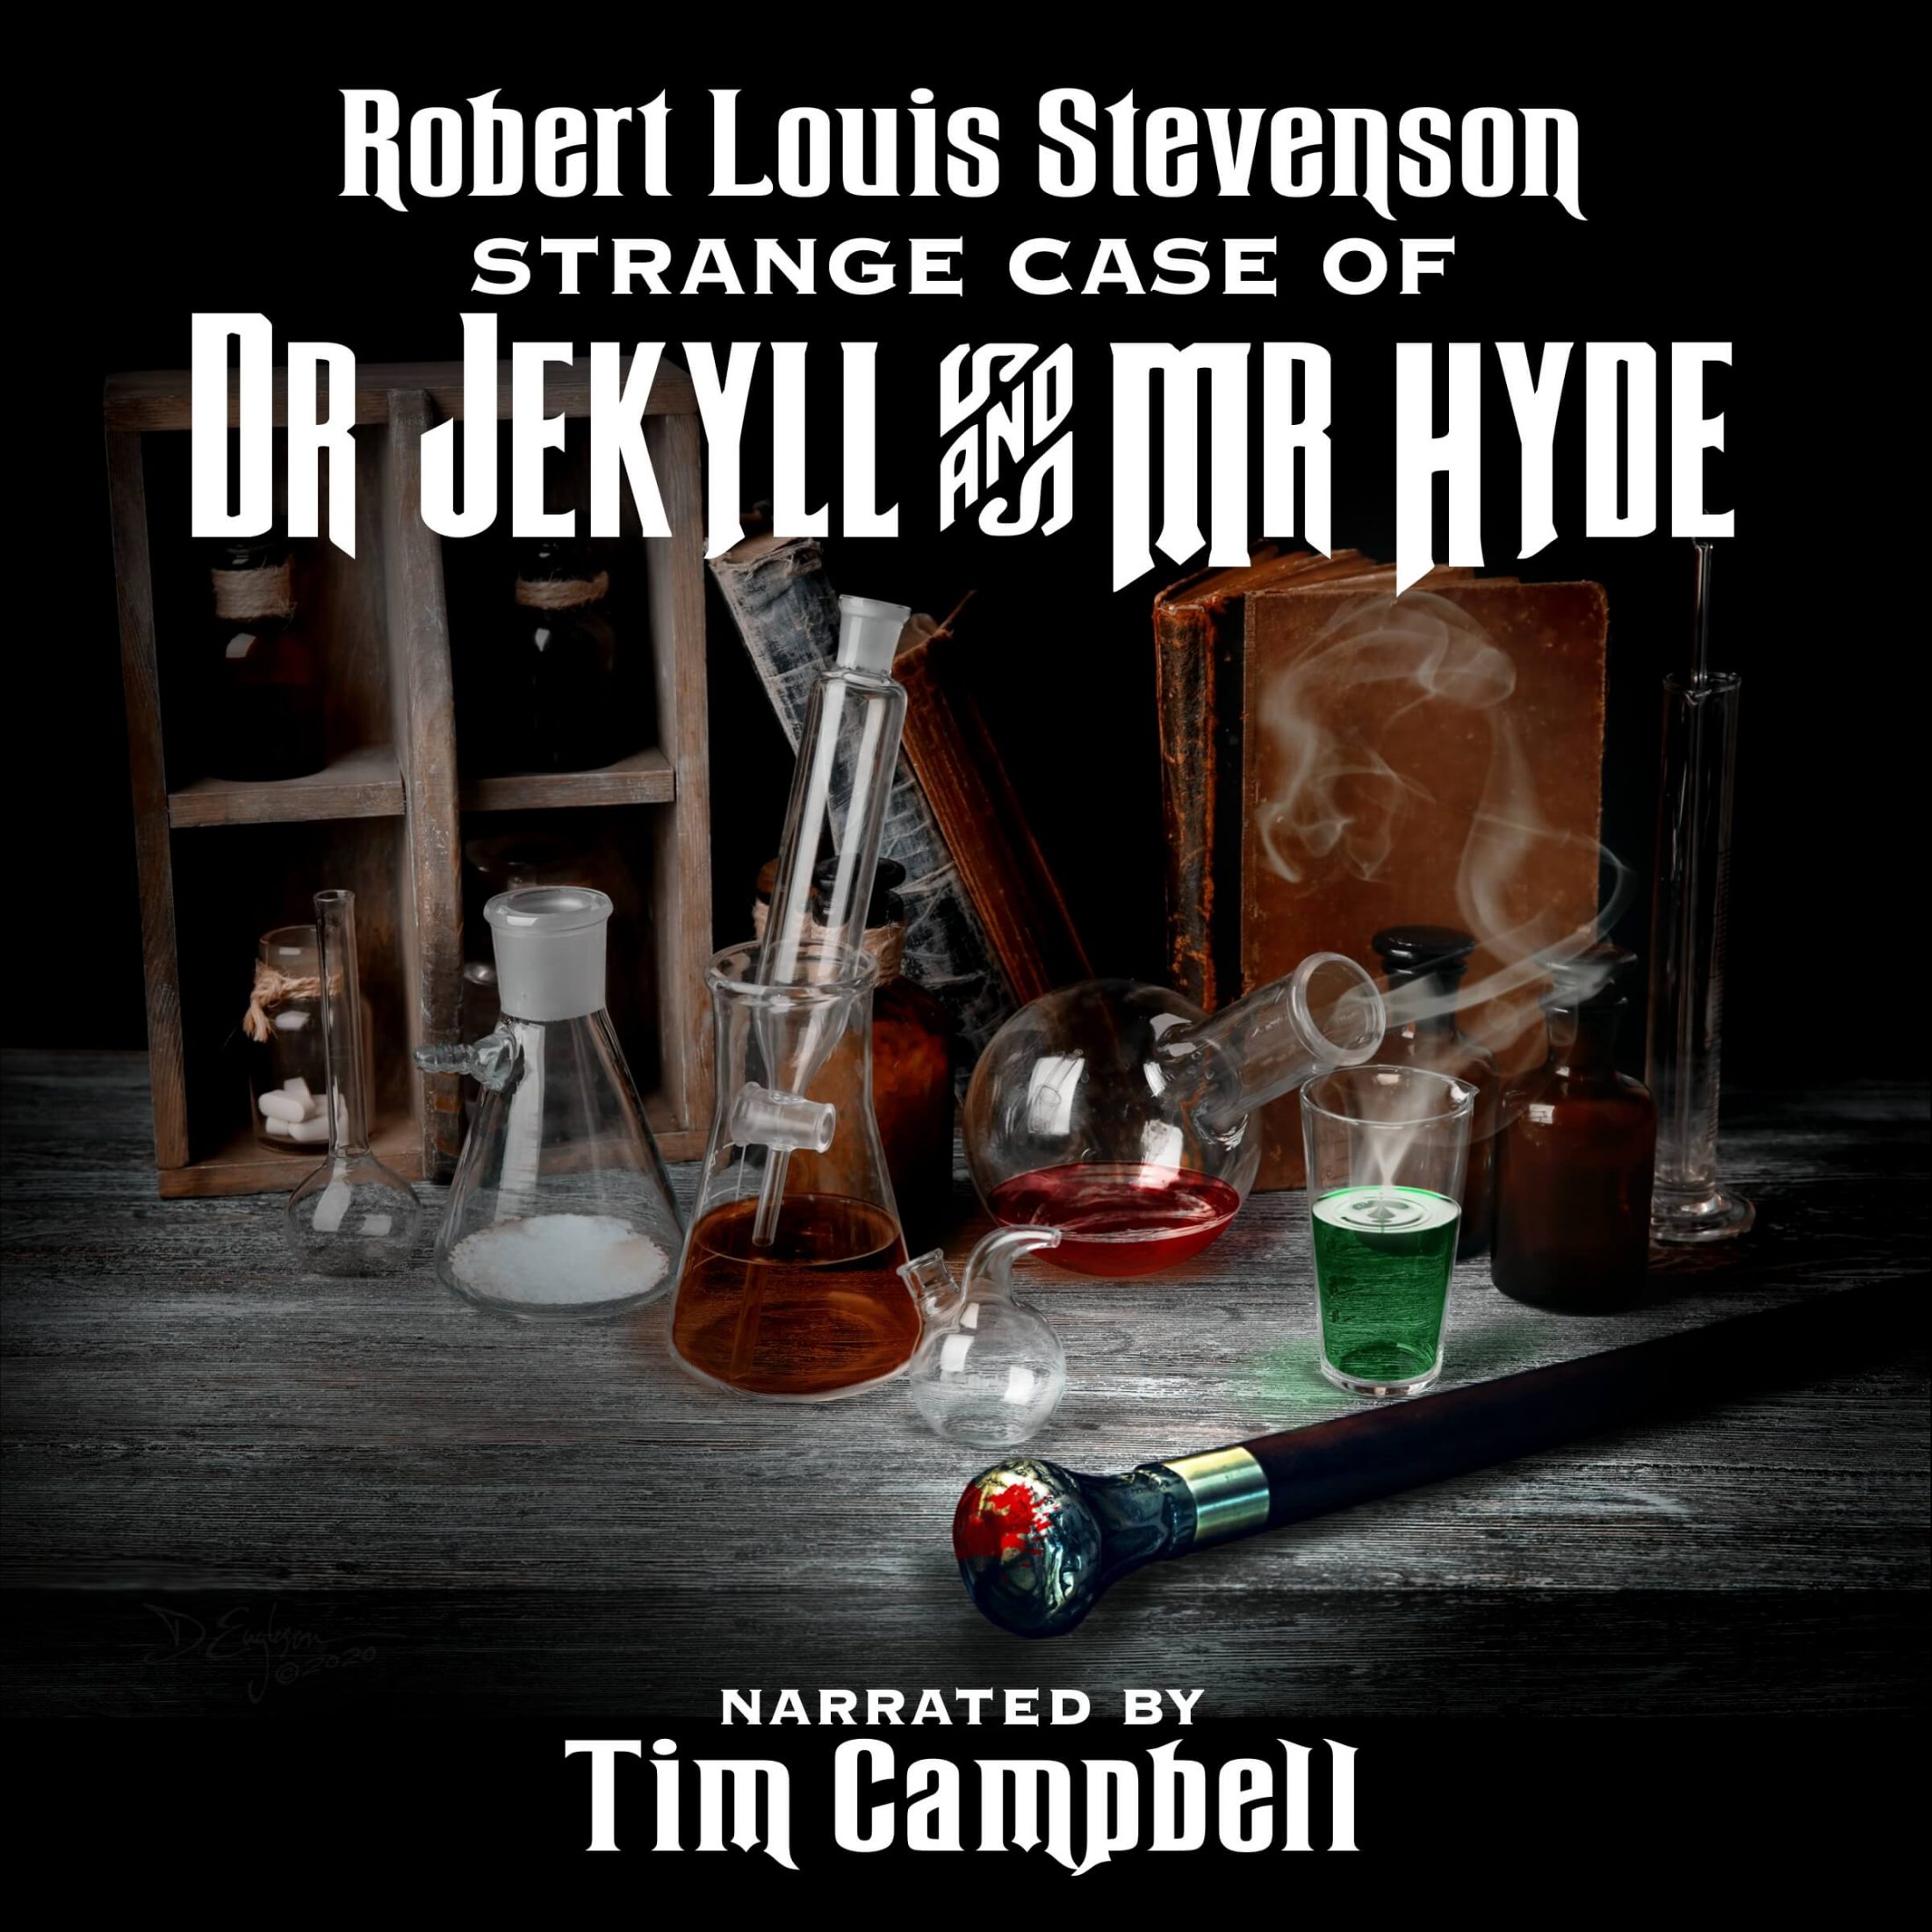 Strange Case of Dr Jekyll and Mr Hyde audio cover design by Corvid Design